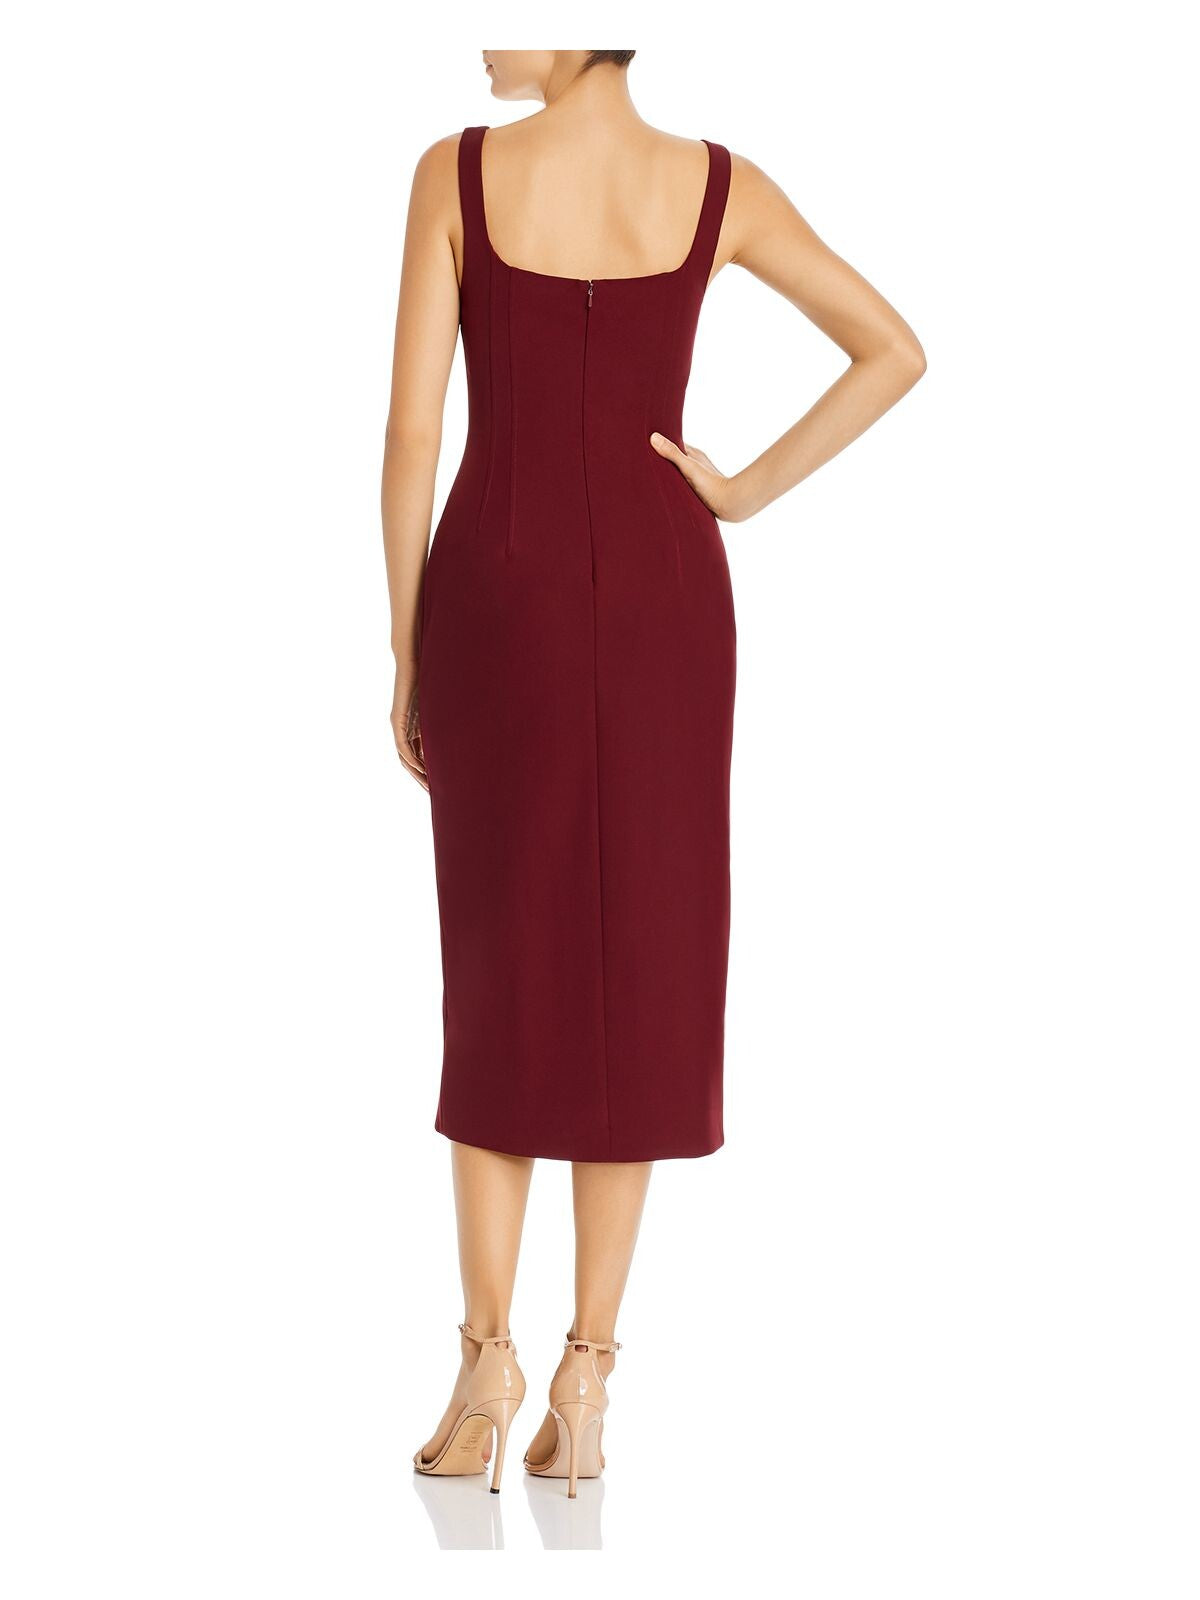 FAME AND PARTNERS Womens Maroon Button Up Spaghetti Strap Square Neck Below The Knee Evening Sheath Dress 2